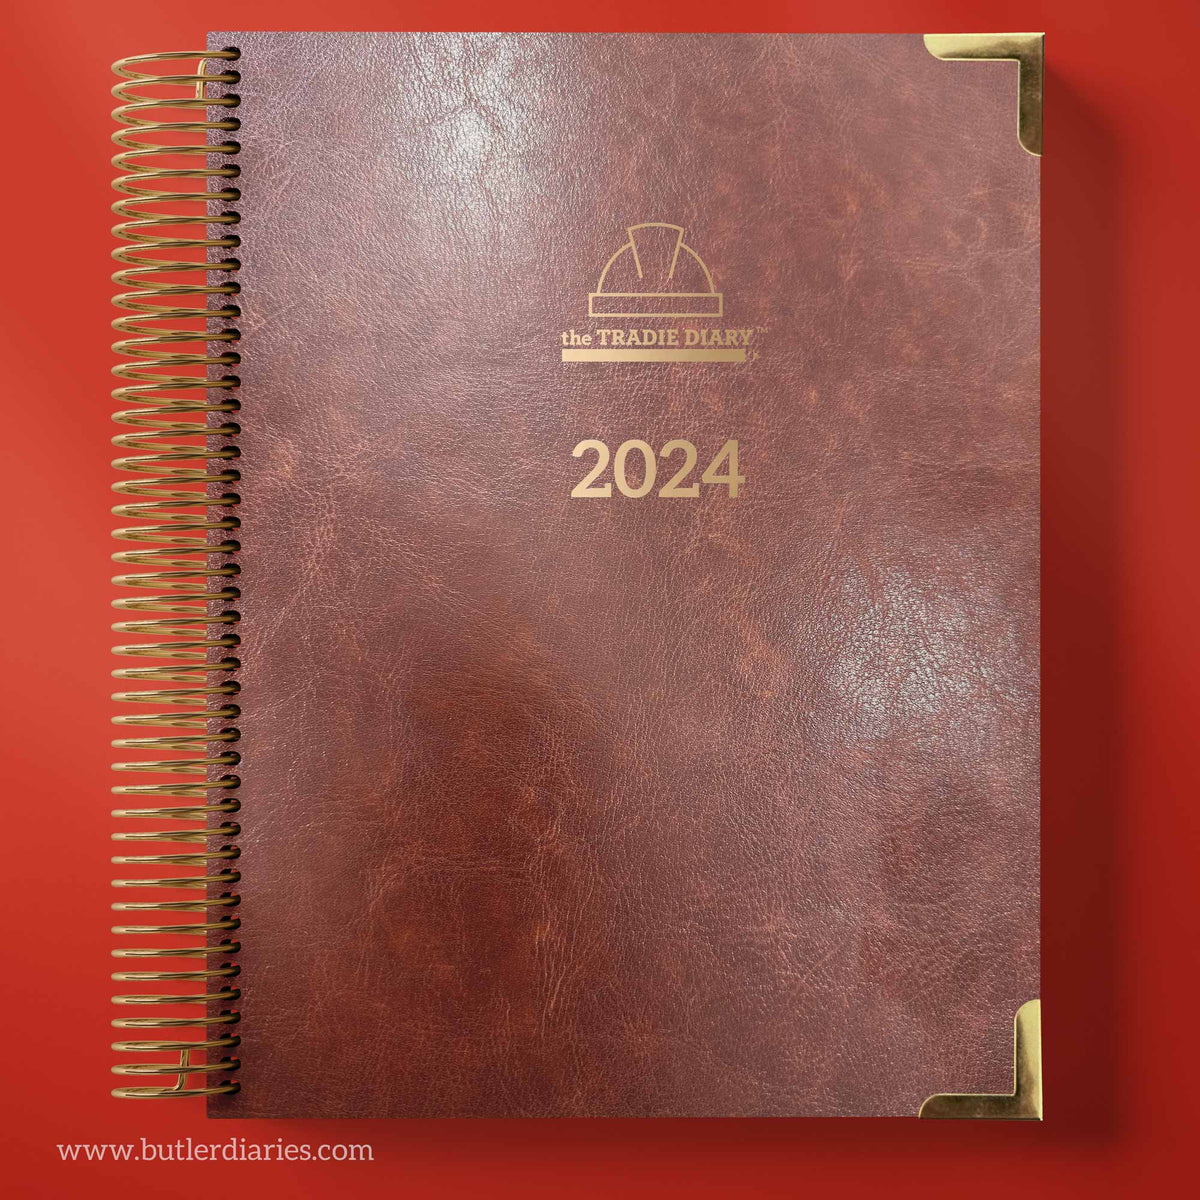 2024 The Tradie Diary Leather Hard Cover Spiral Bound Butler Diaries